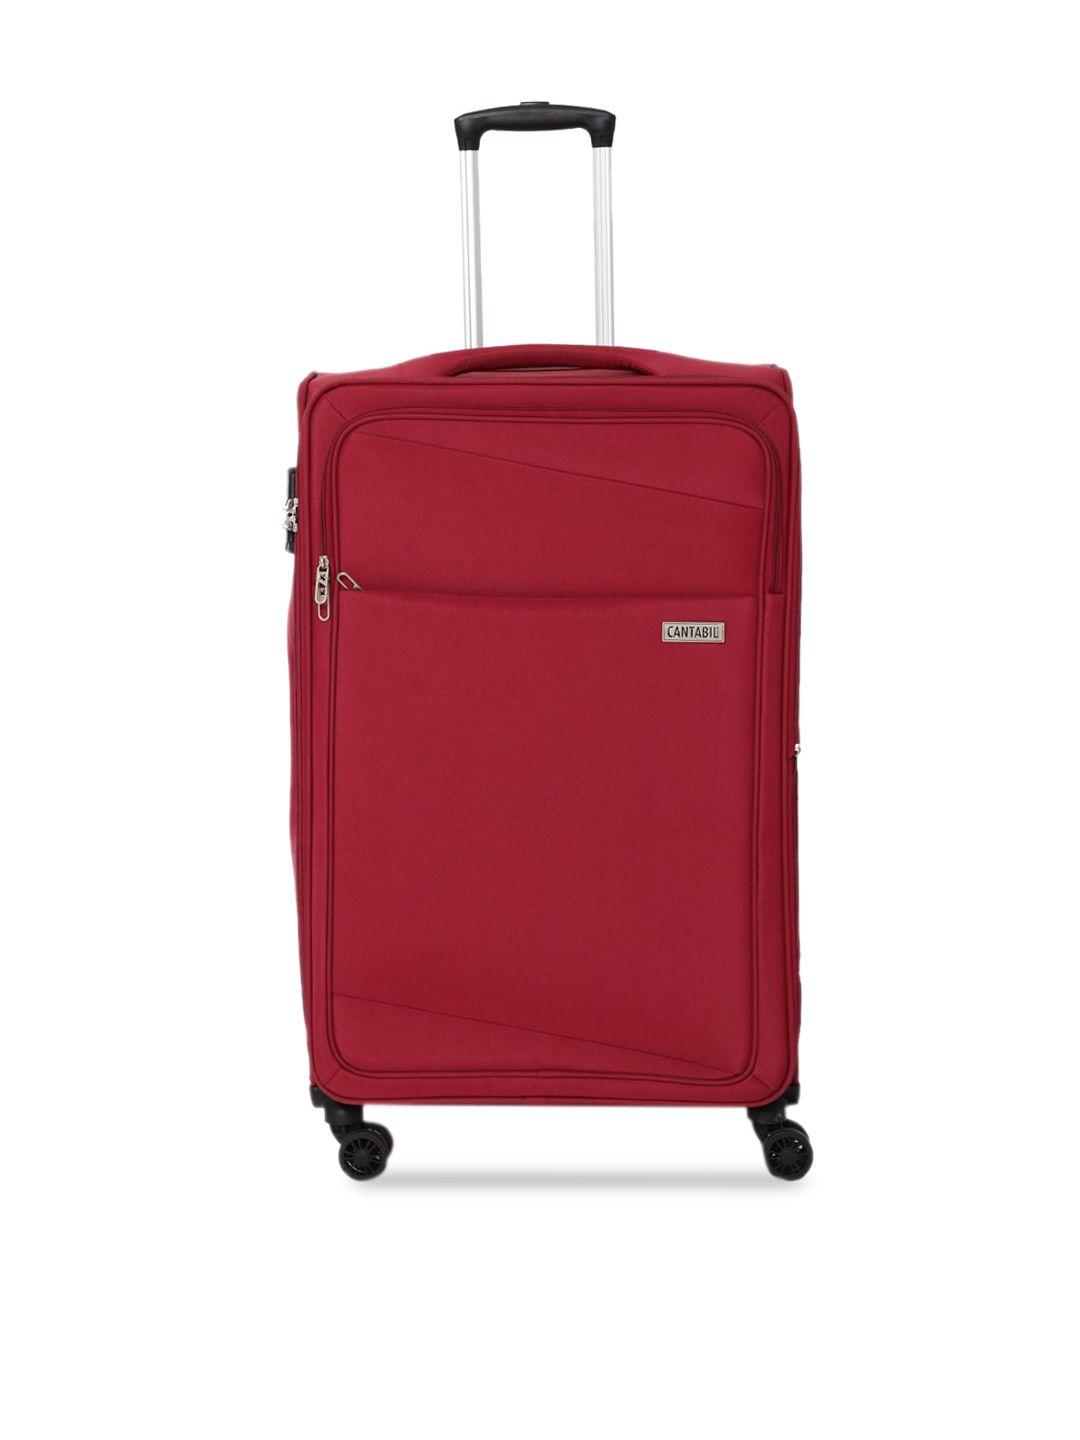 cantabil softsided cabin trolley suitcase bag